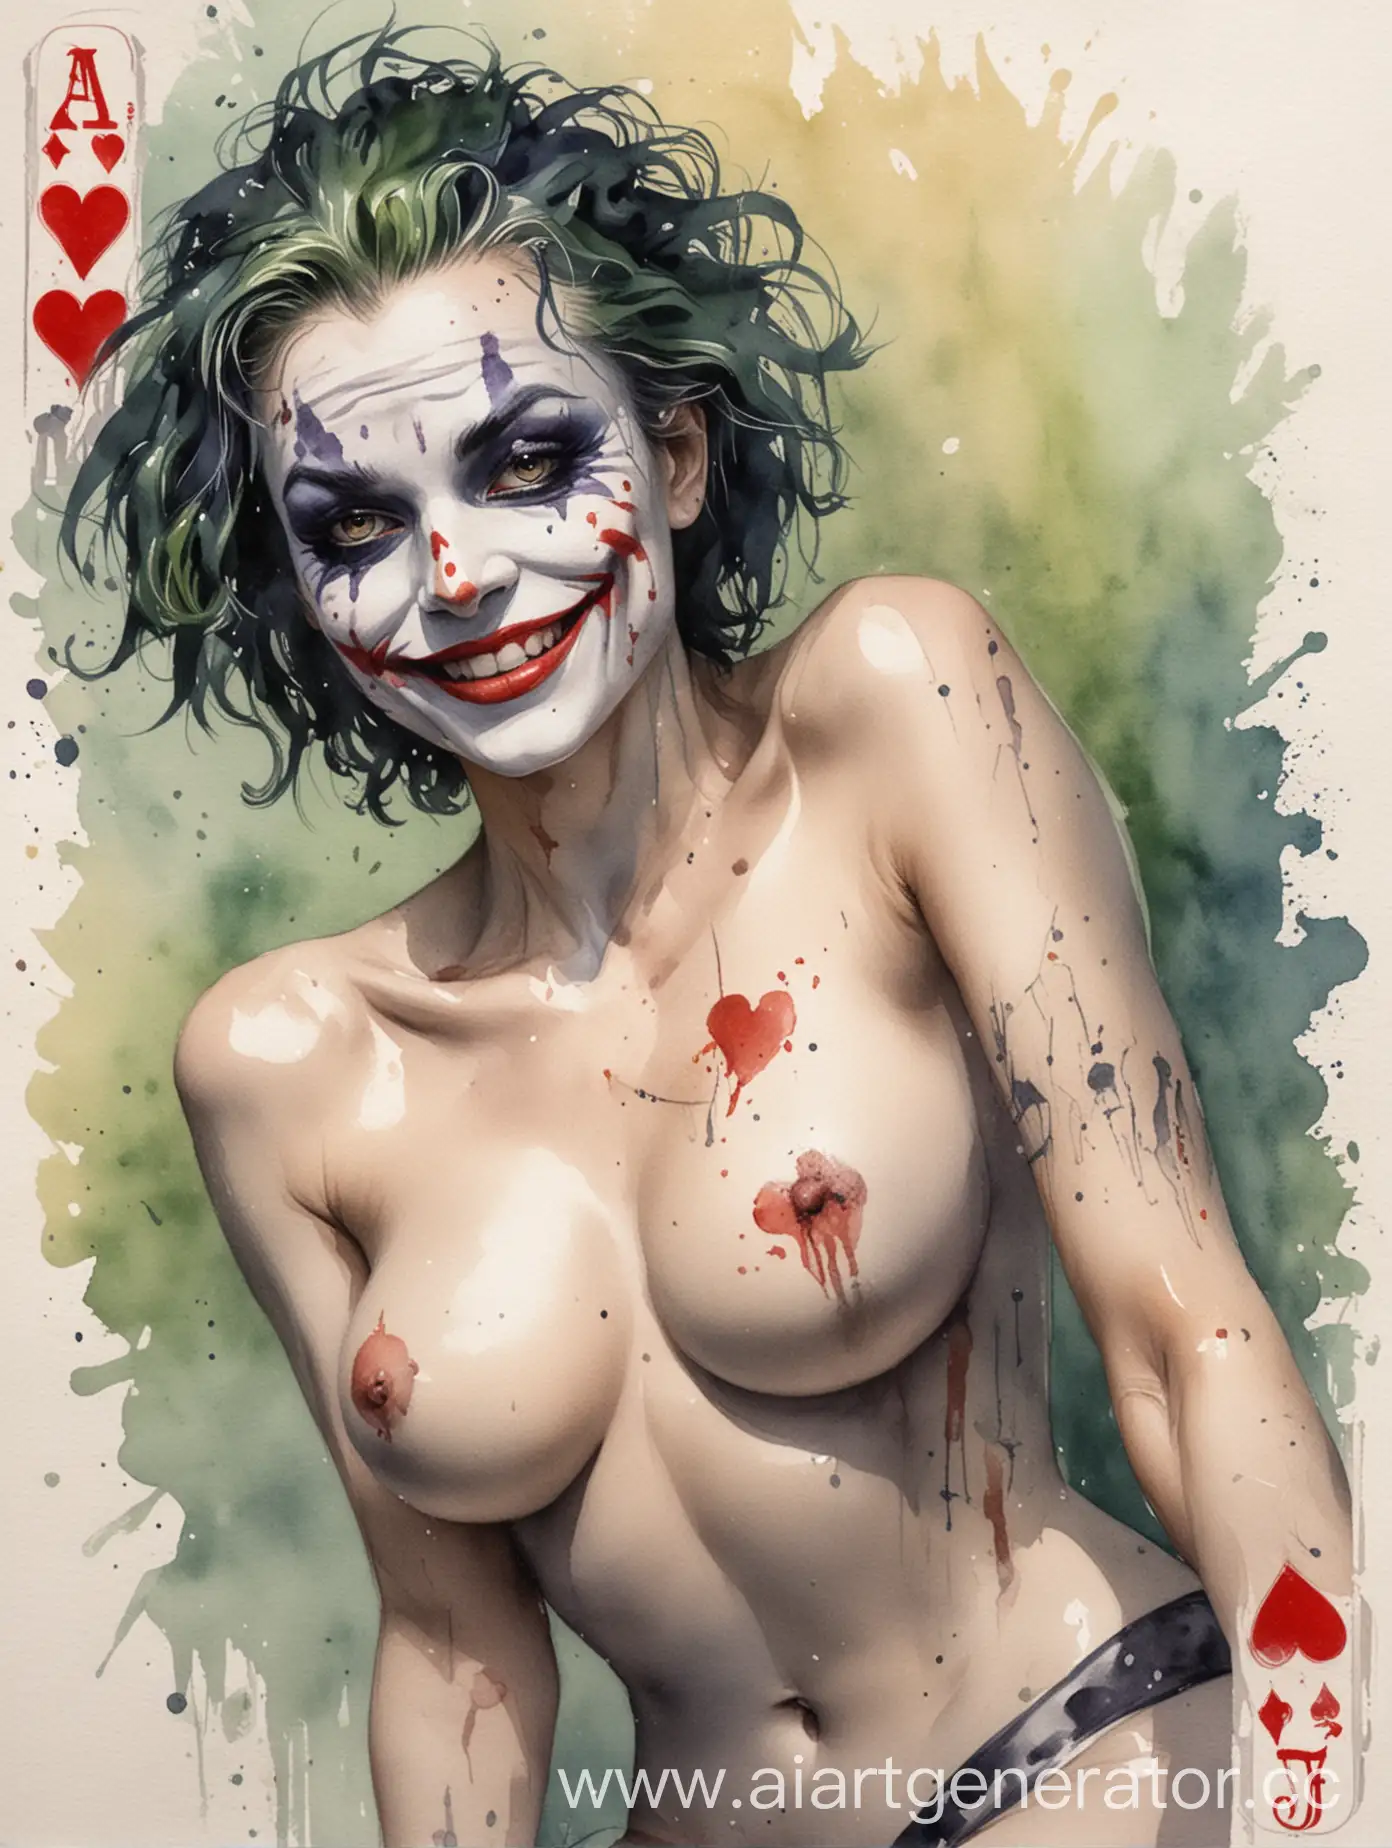 Erotic-Watercolor-Painting-Naked-Woman-Joker-with-Cheerful-Pose